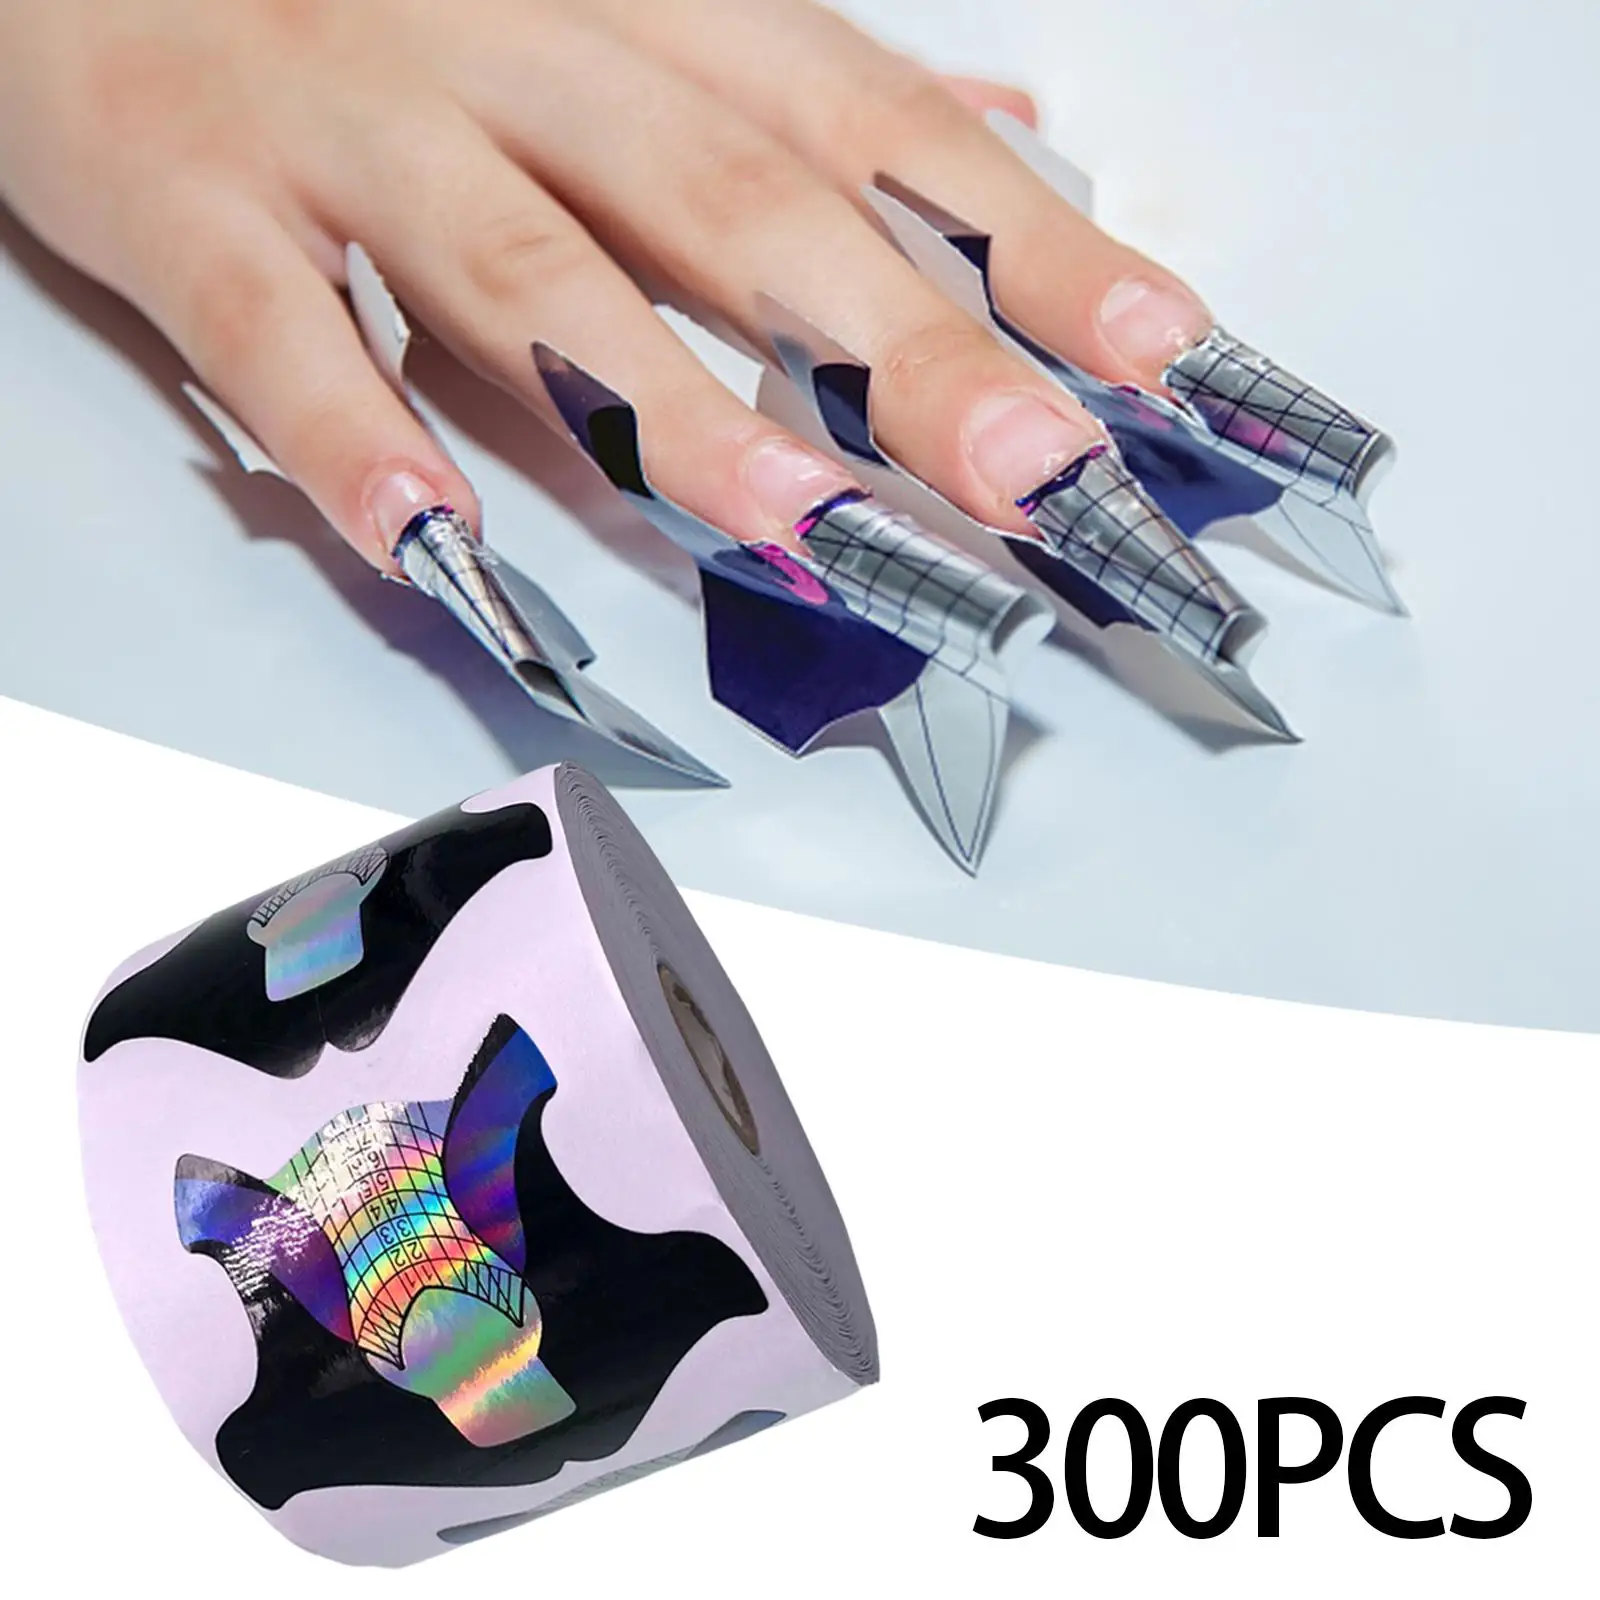 300 Pieces Nail Forms for Acrylic Nails Manicure Tool Nail Paper Forms Nail Art Equipment for Artists Beginners Home Use